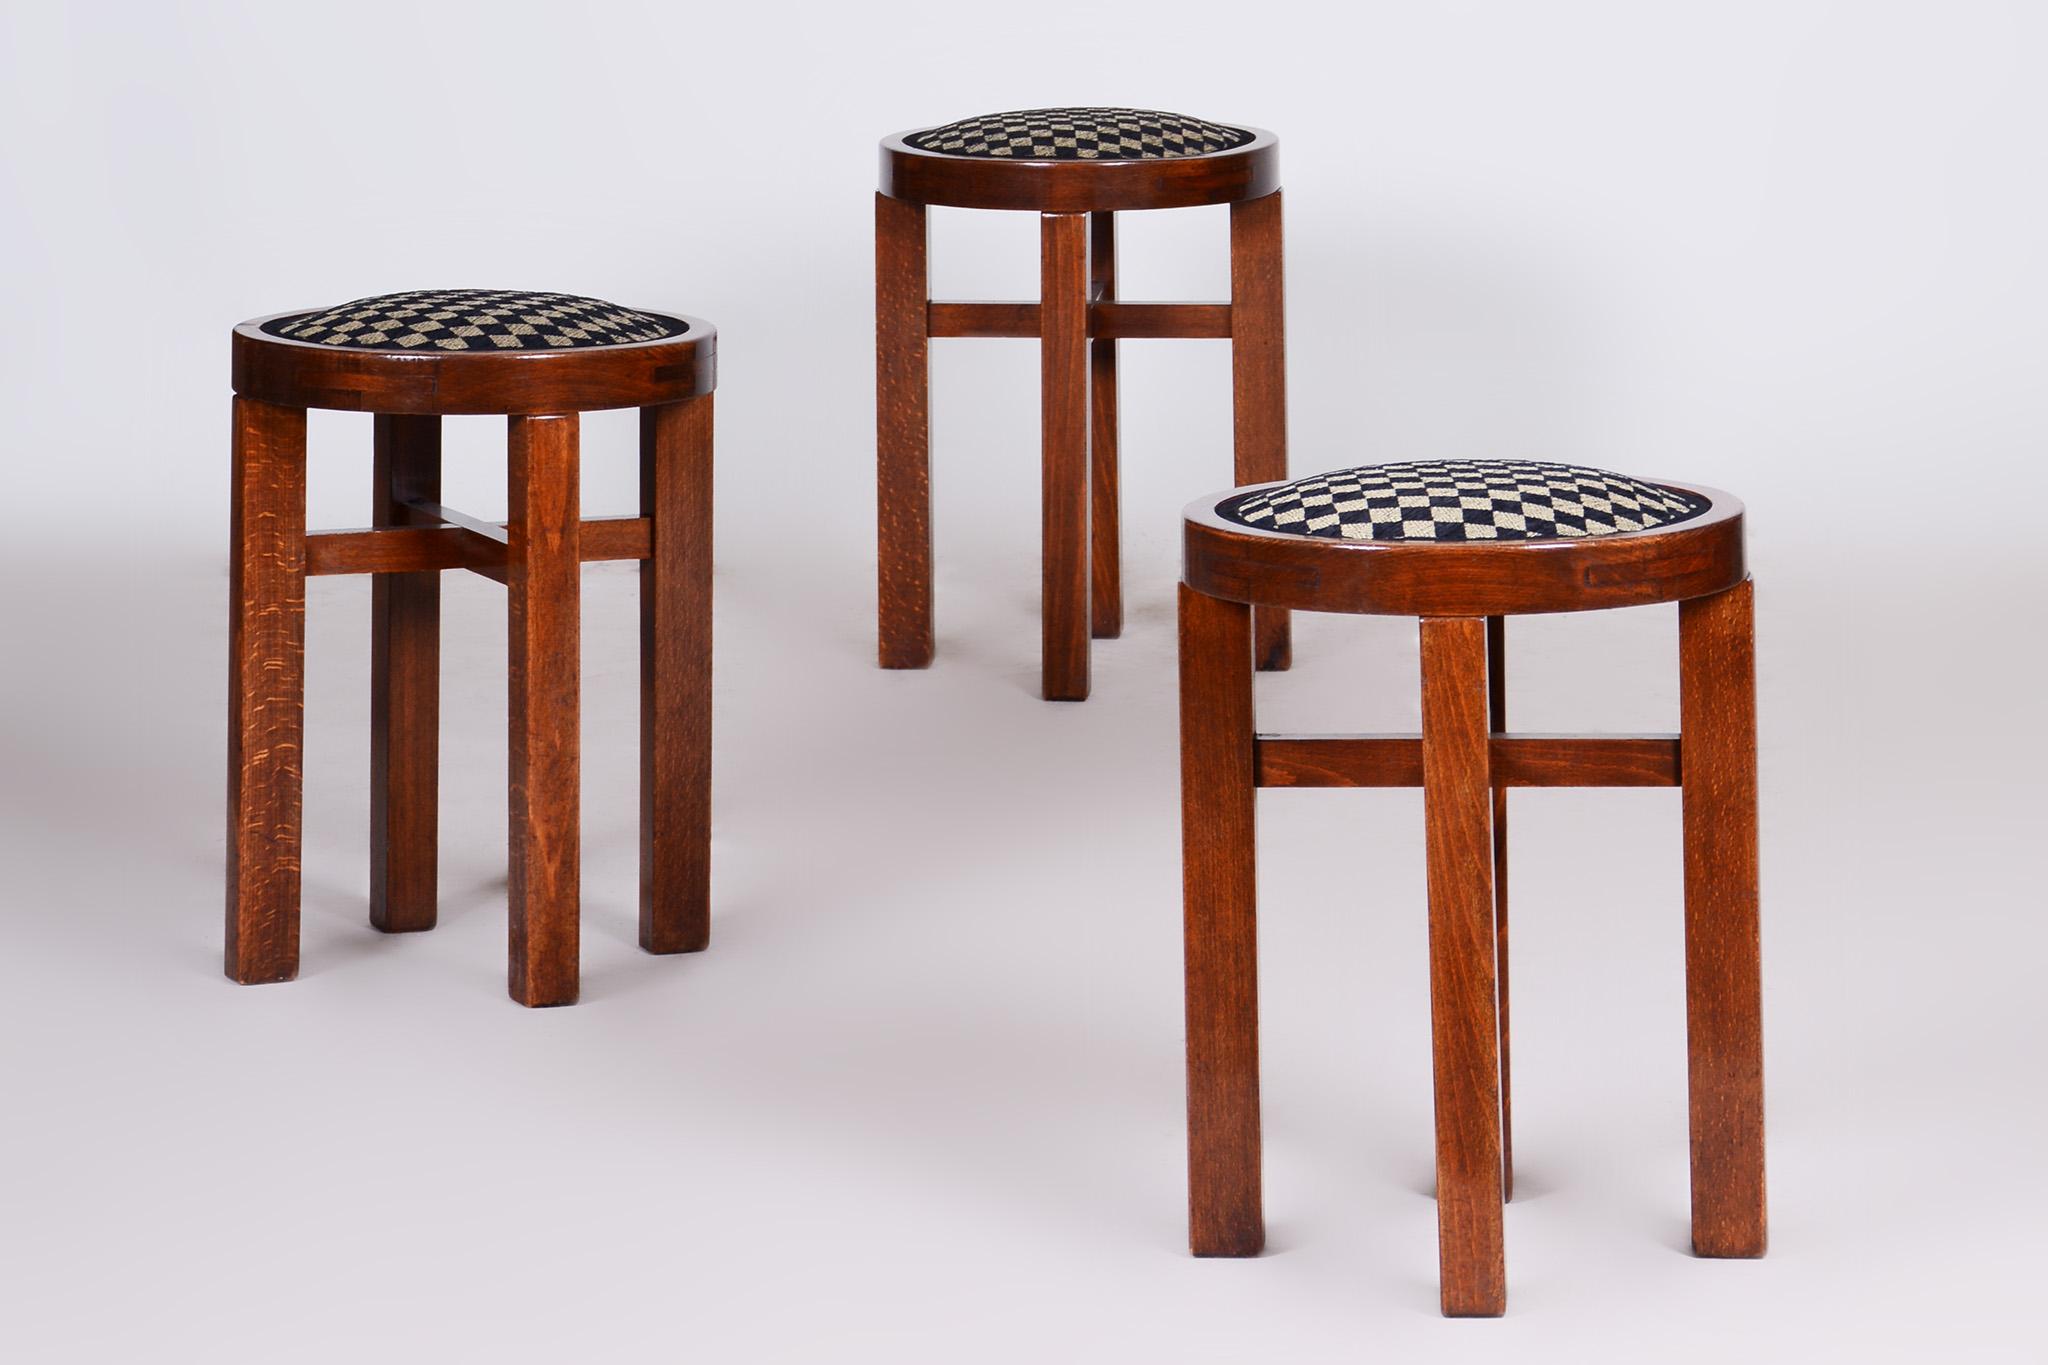 20th Century Set of 3 ArtDeco Foot Stools Made in´20s Czechia, New upholstery, Revived polish For Sale